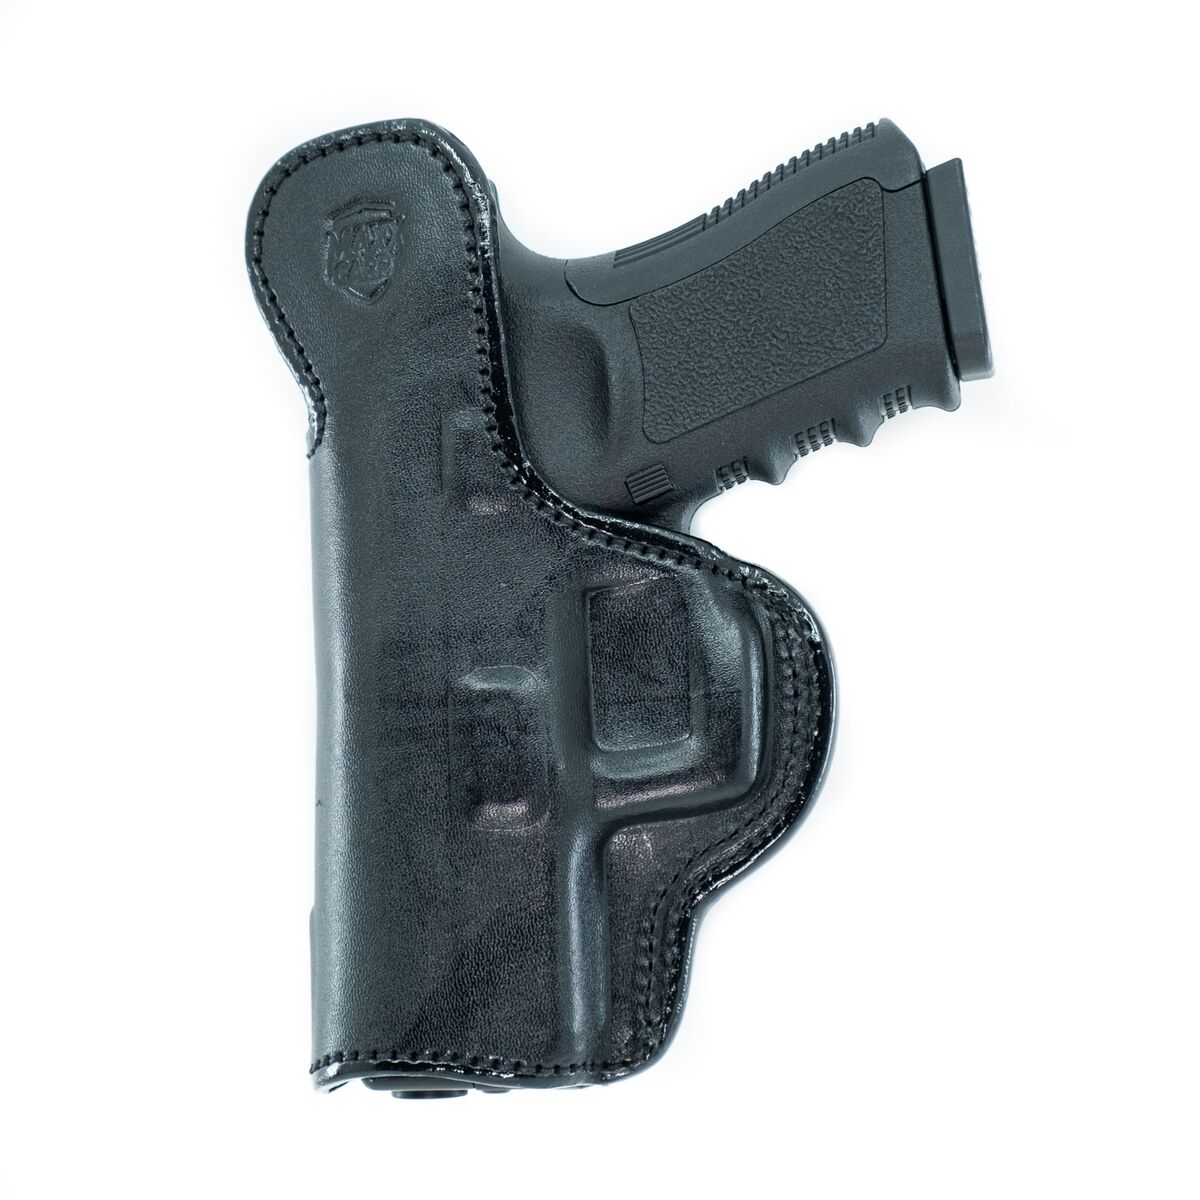 GUN HOLSTER FOR CZ 75, 85, 85B, 97, 97B. IWB LEATHER HOLSTER CONCEAL CARRY.